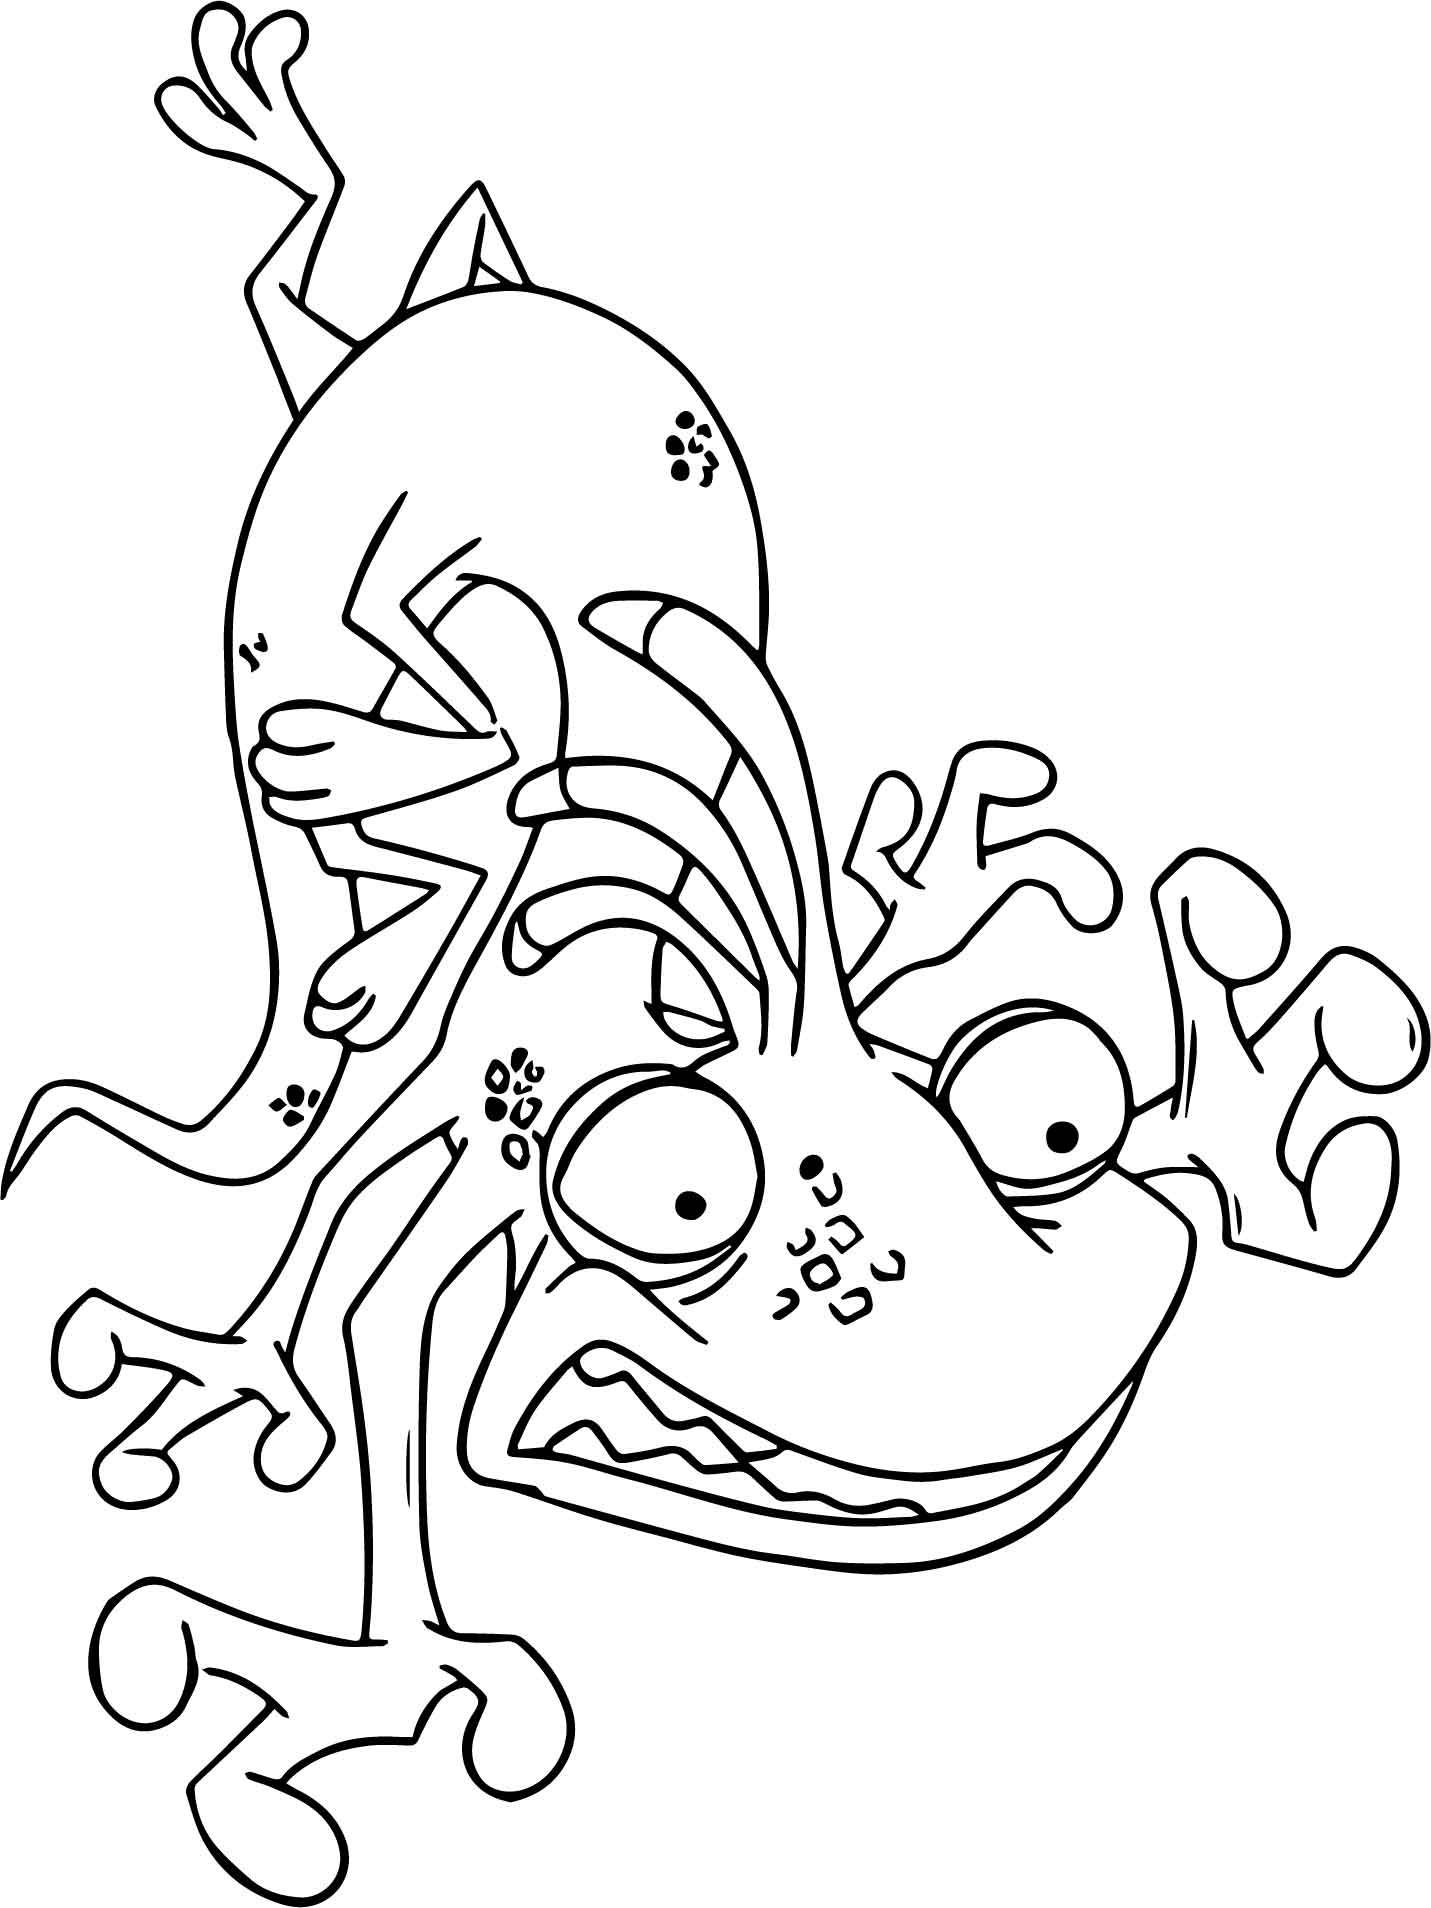 randall monsters inc coloring pages